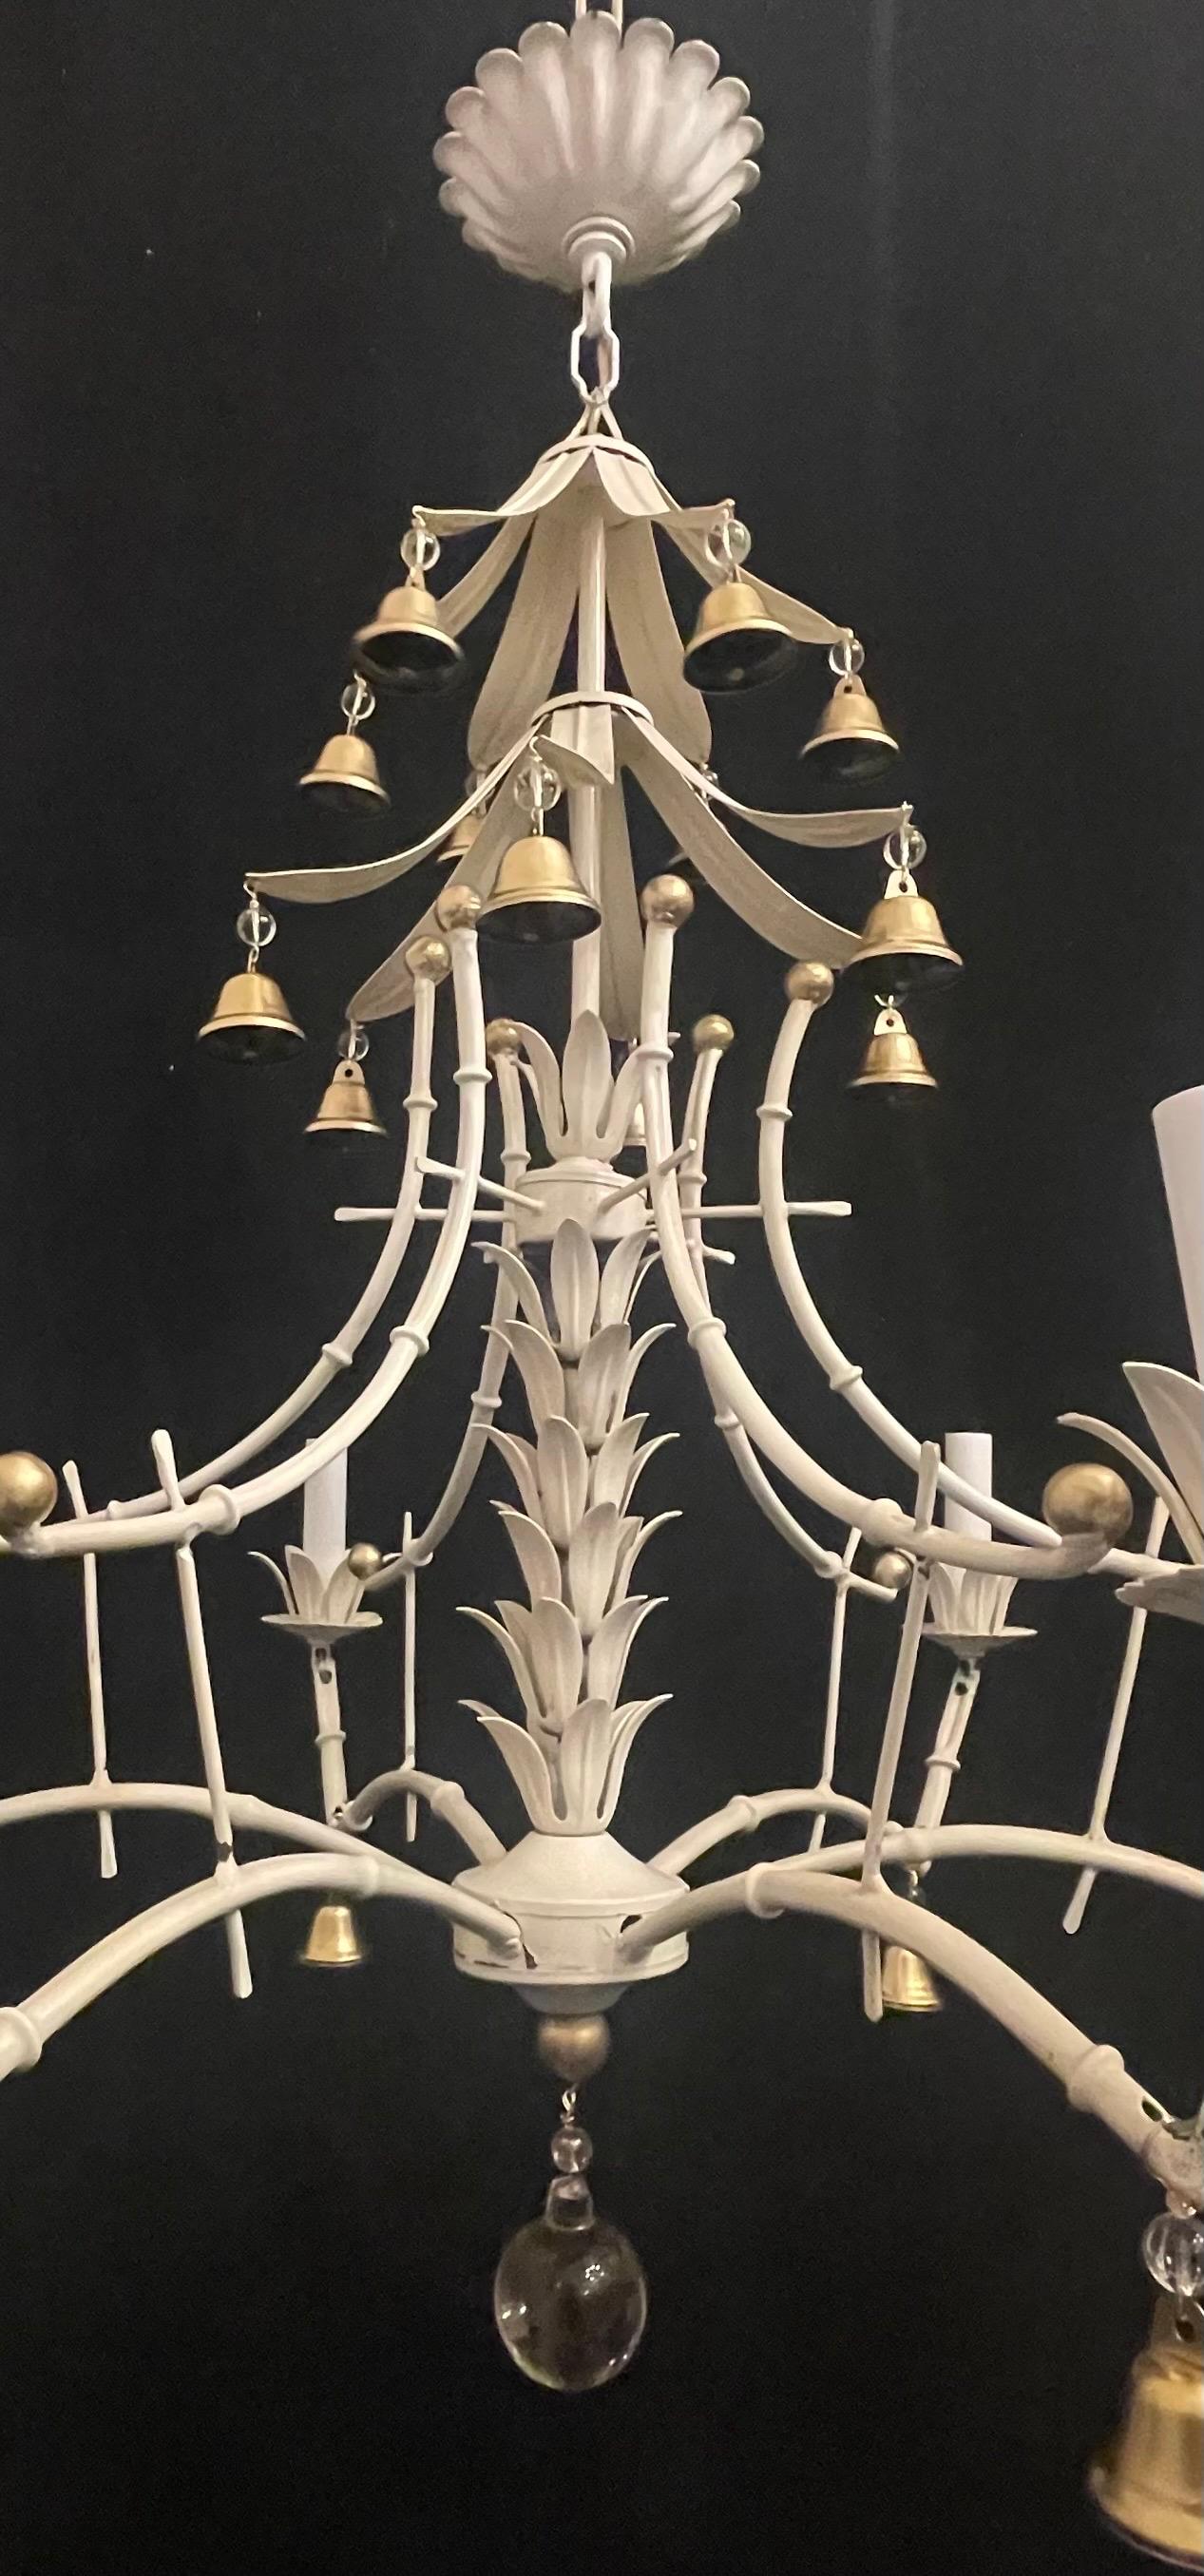 A Wonderful Vintage Faux Bamboo Pagoda Form Tole White With Gold Gilt Highlights Metal Classic Palm Beach Chandelier Having Bell Accents, Completely Rewired With 6 Candelabra Sockets With 40 Watts Per Socket. 
Total Height Listed Includes Chain And